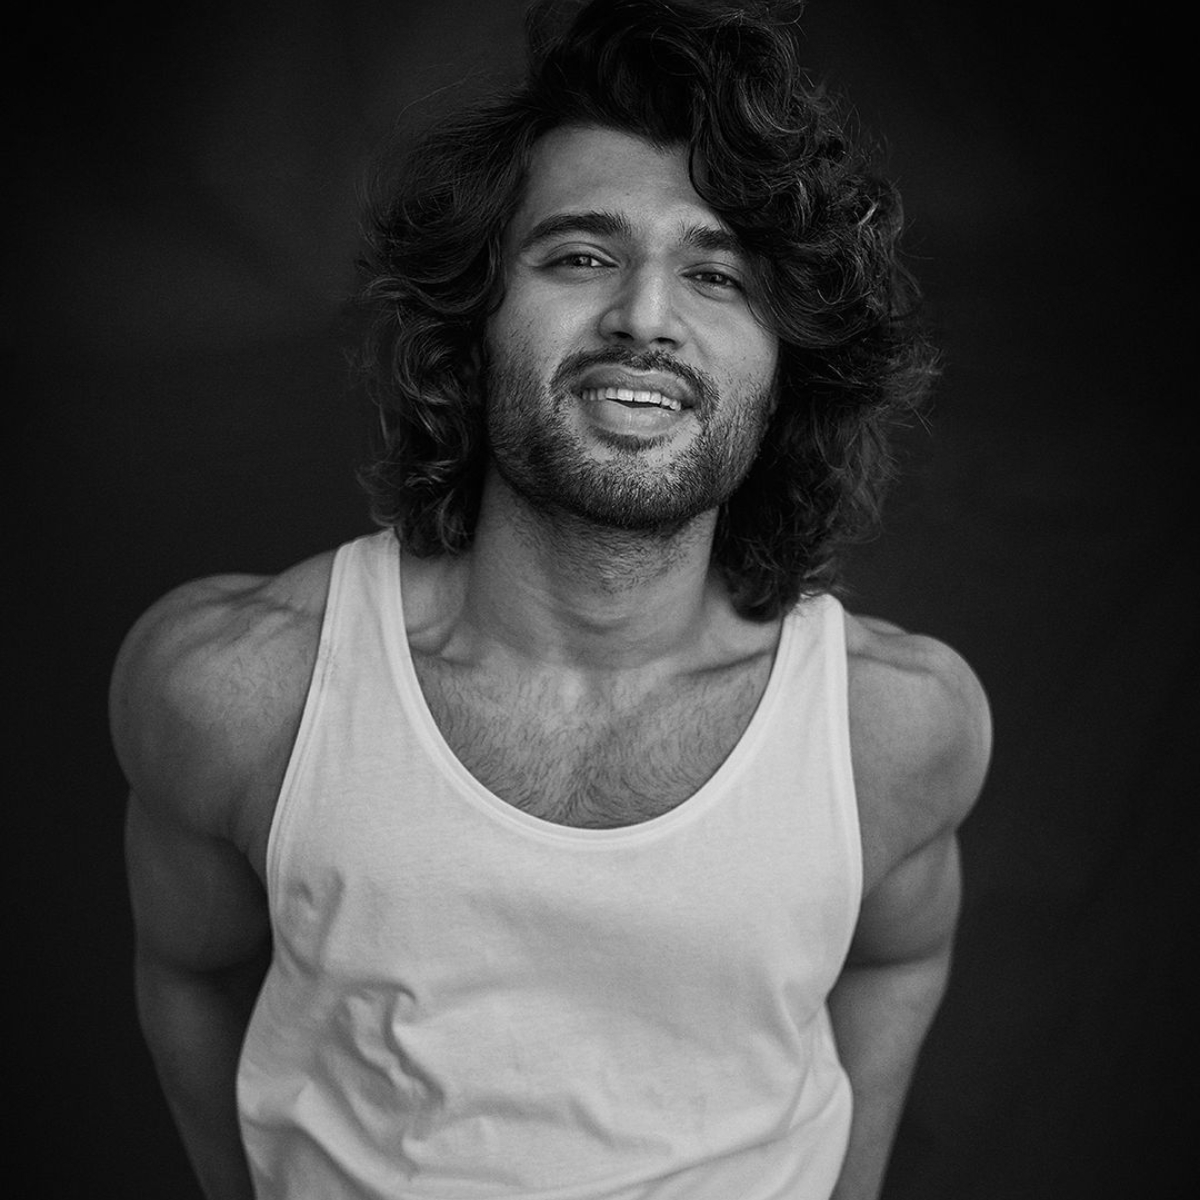 EXCLUSIVE: Vijay Deverakonda's fitness trainer for Liger spills the beans on his intense training session